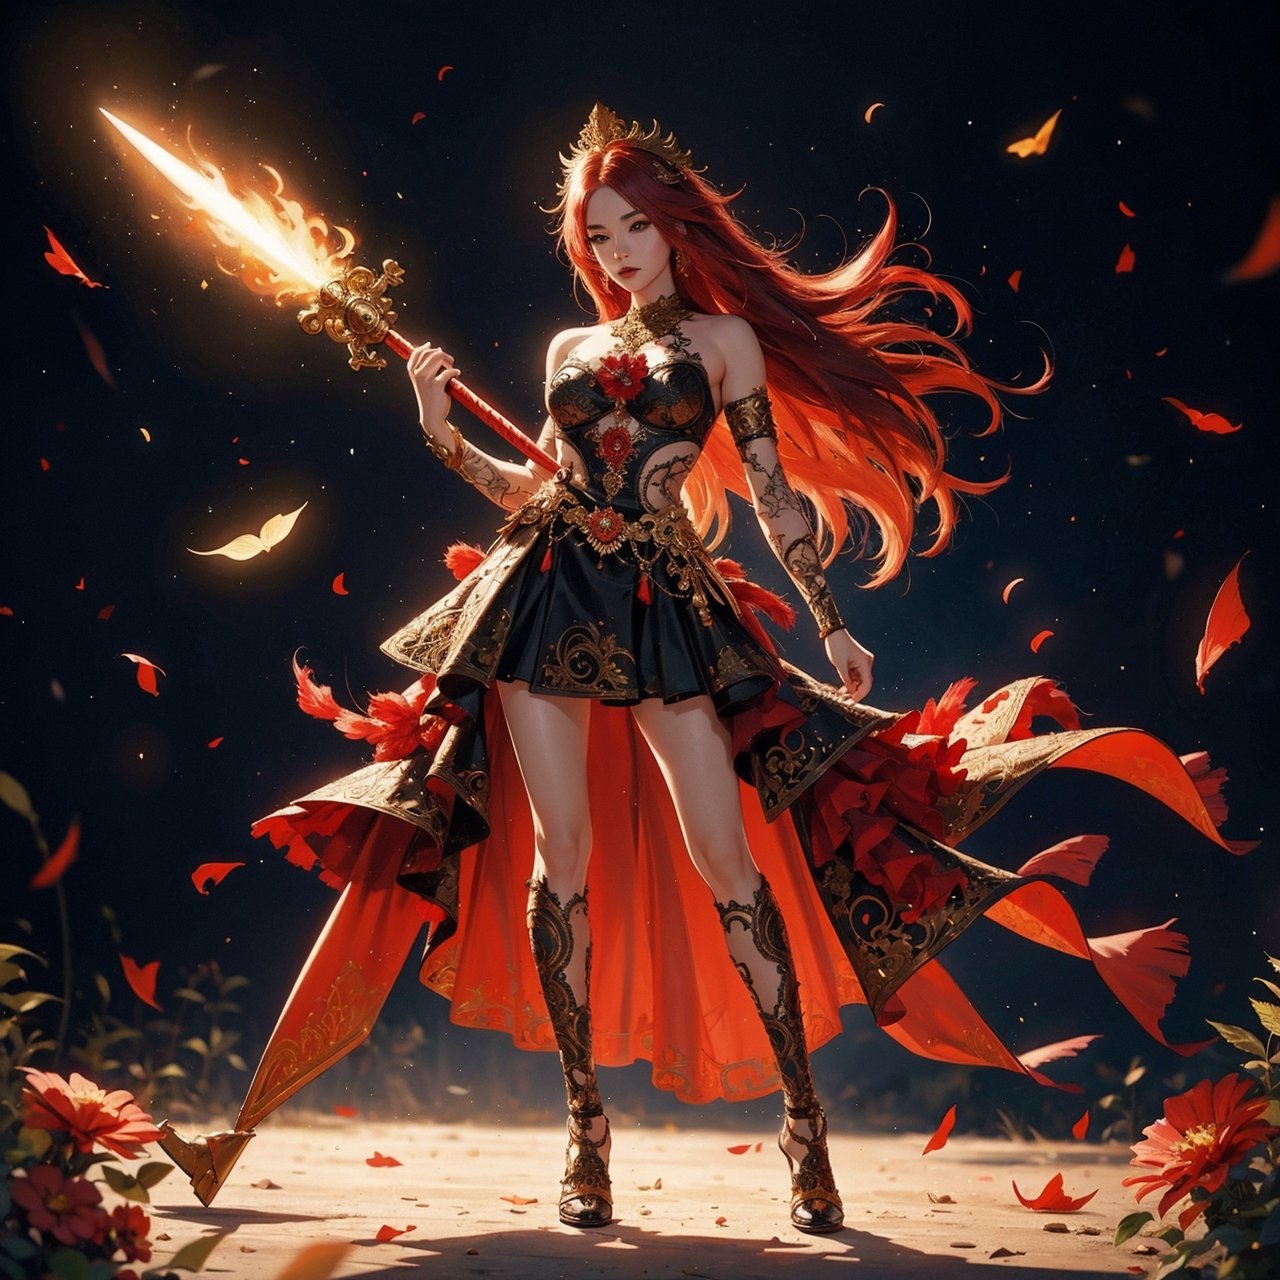 Full body image, 2.5D drawing, sexy 18 year old girl in fire goddess costume, fiery red hair with flower decoration, Pantone costume, magic valley, gold and red magic sword, light show, (Visual Arts, Abstract: 1.2) ,Fantasy,(Realism: 1.3),(Intricate Detail: 1.5),Shallow Depth of Field,Bokeh,Digital Illustration,Fantasy,AgoonGirl,1 Girl,